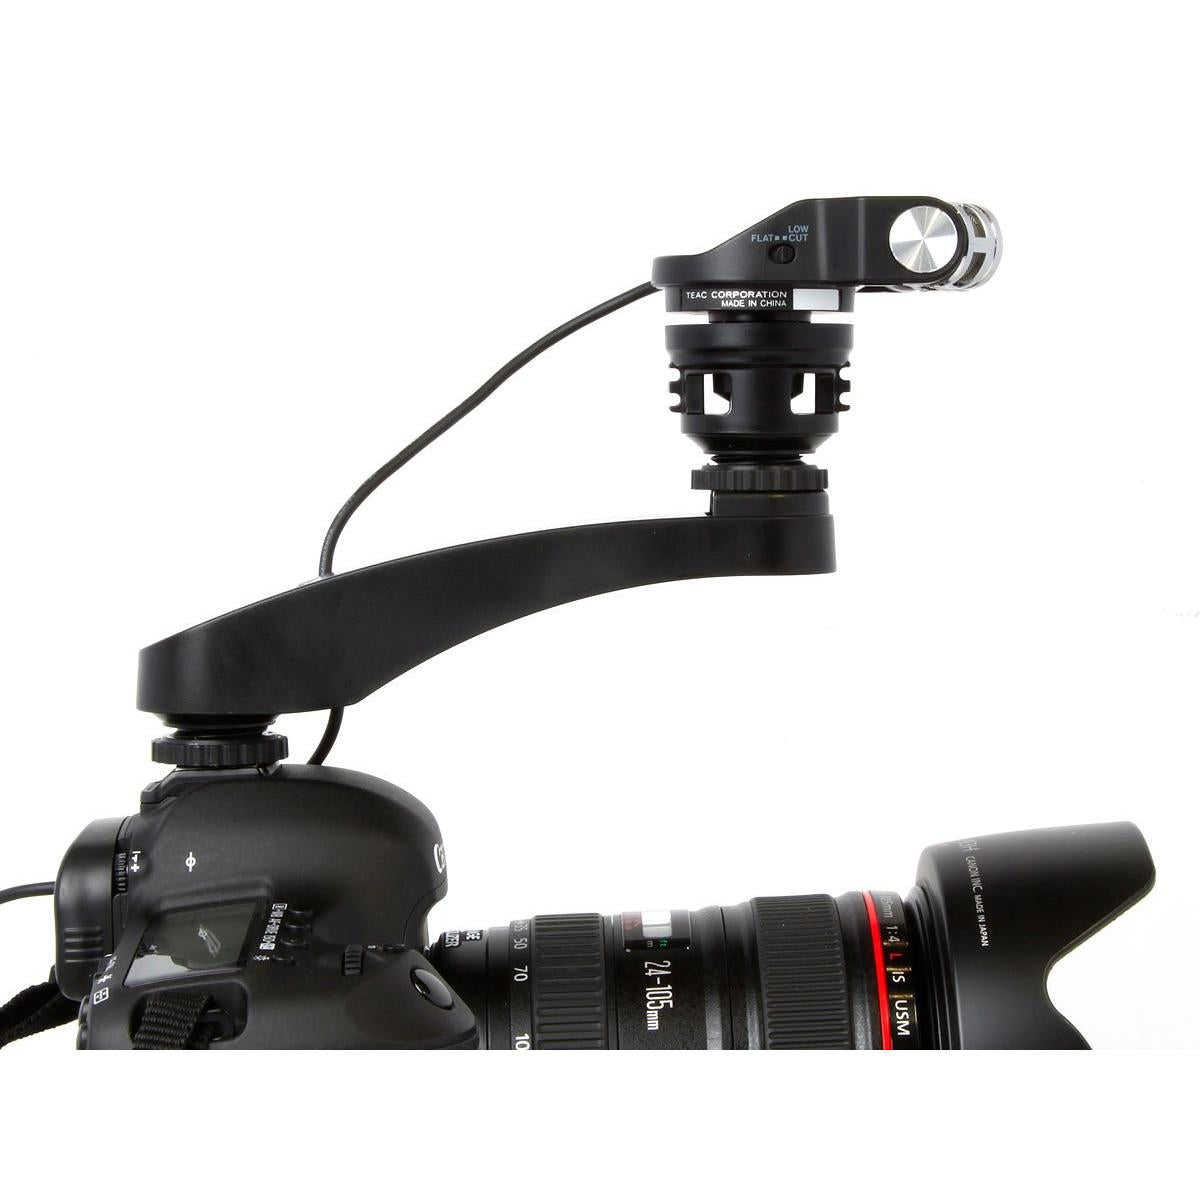 Tascam TM-2X HD Stereo Microphone for DSLR Cameras